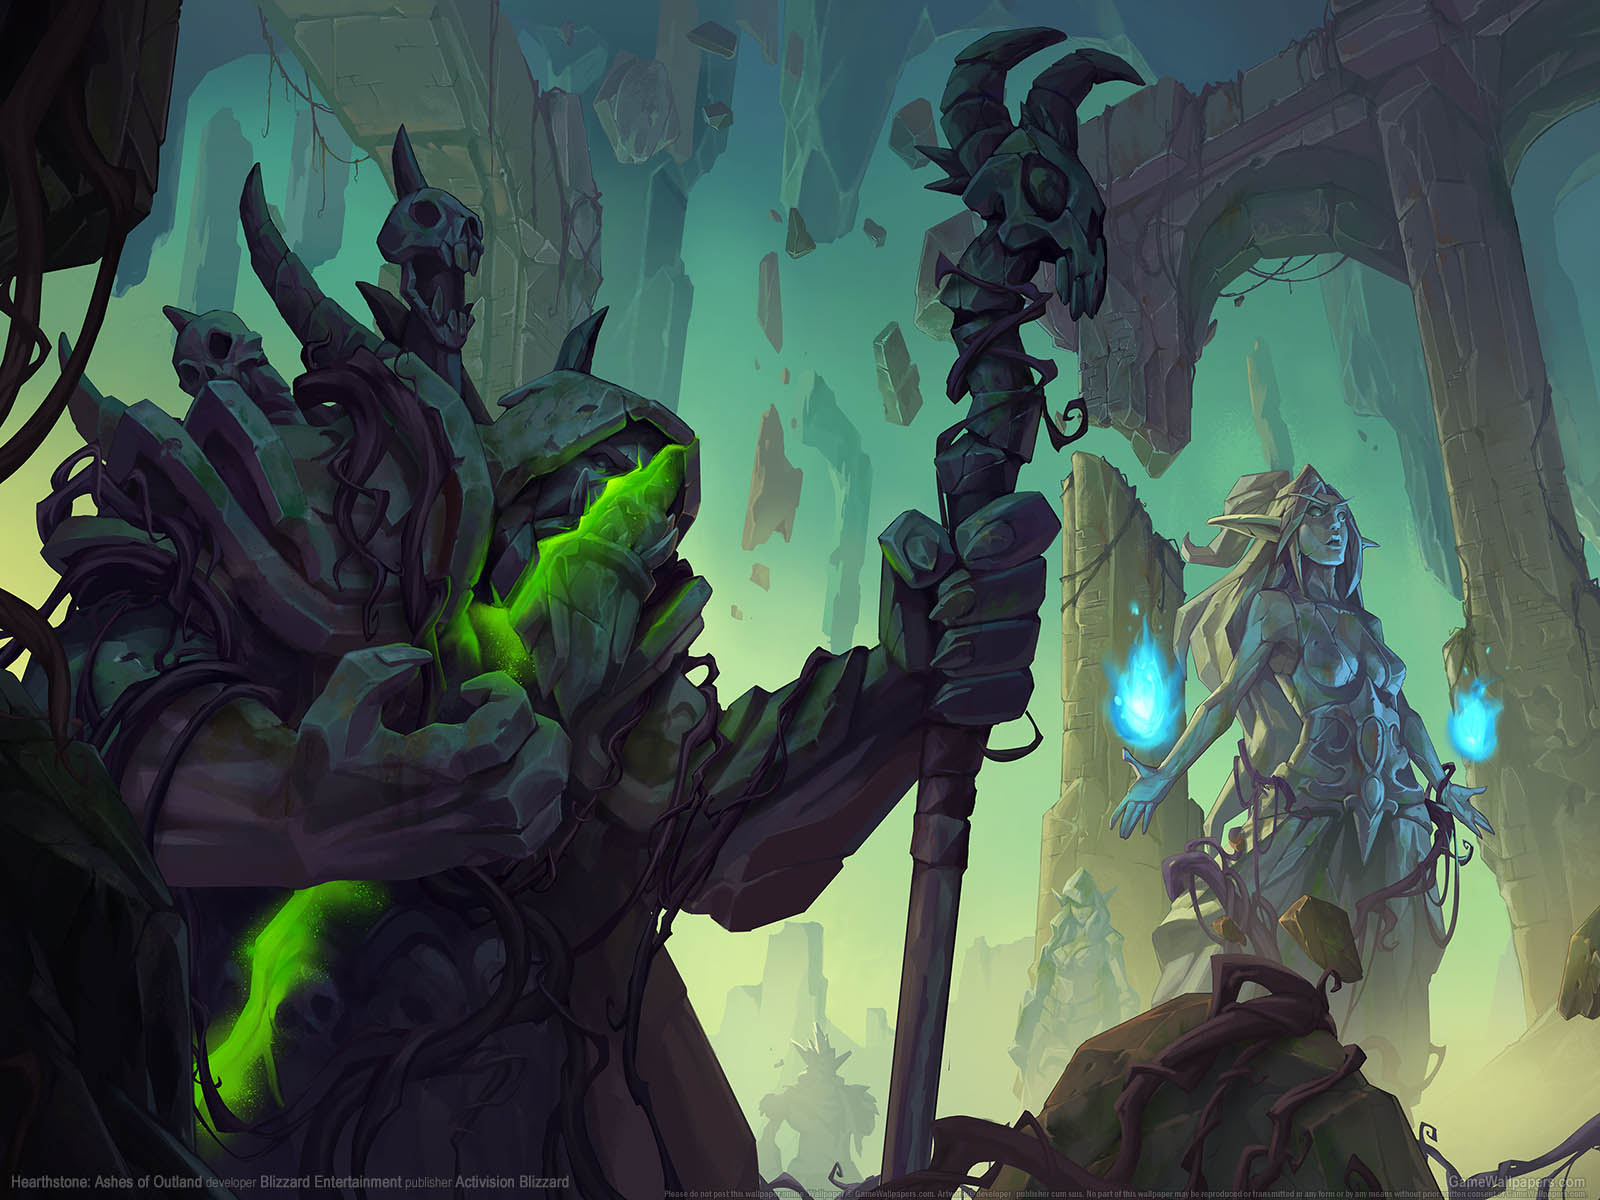 Hearthstone%3A Ashes of Outland wallpaper 01 1600x1200